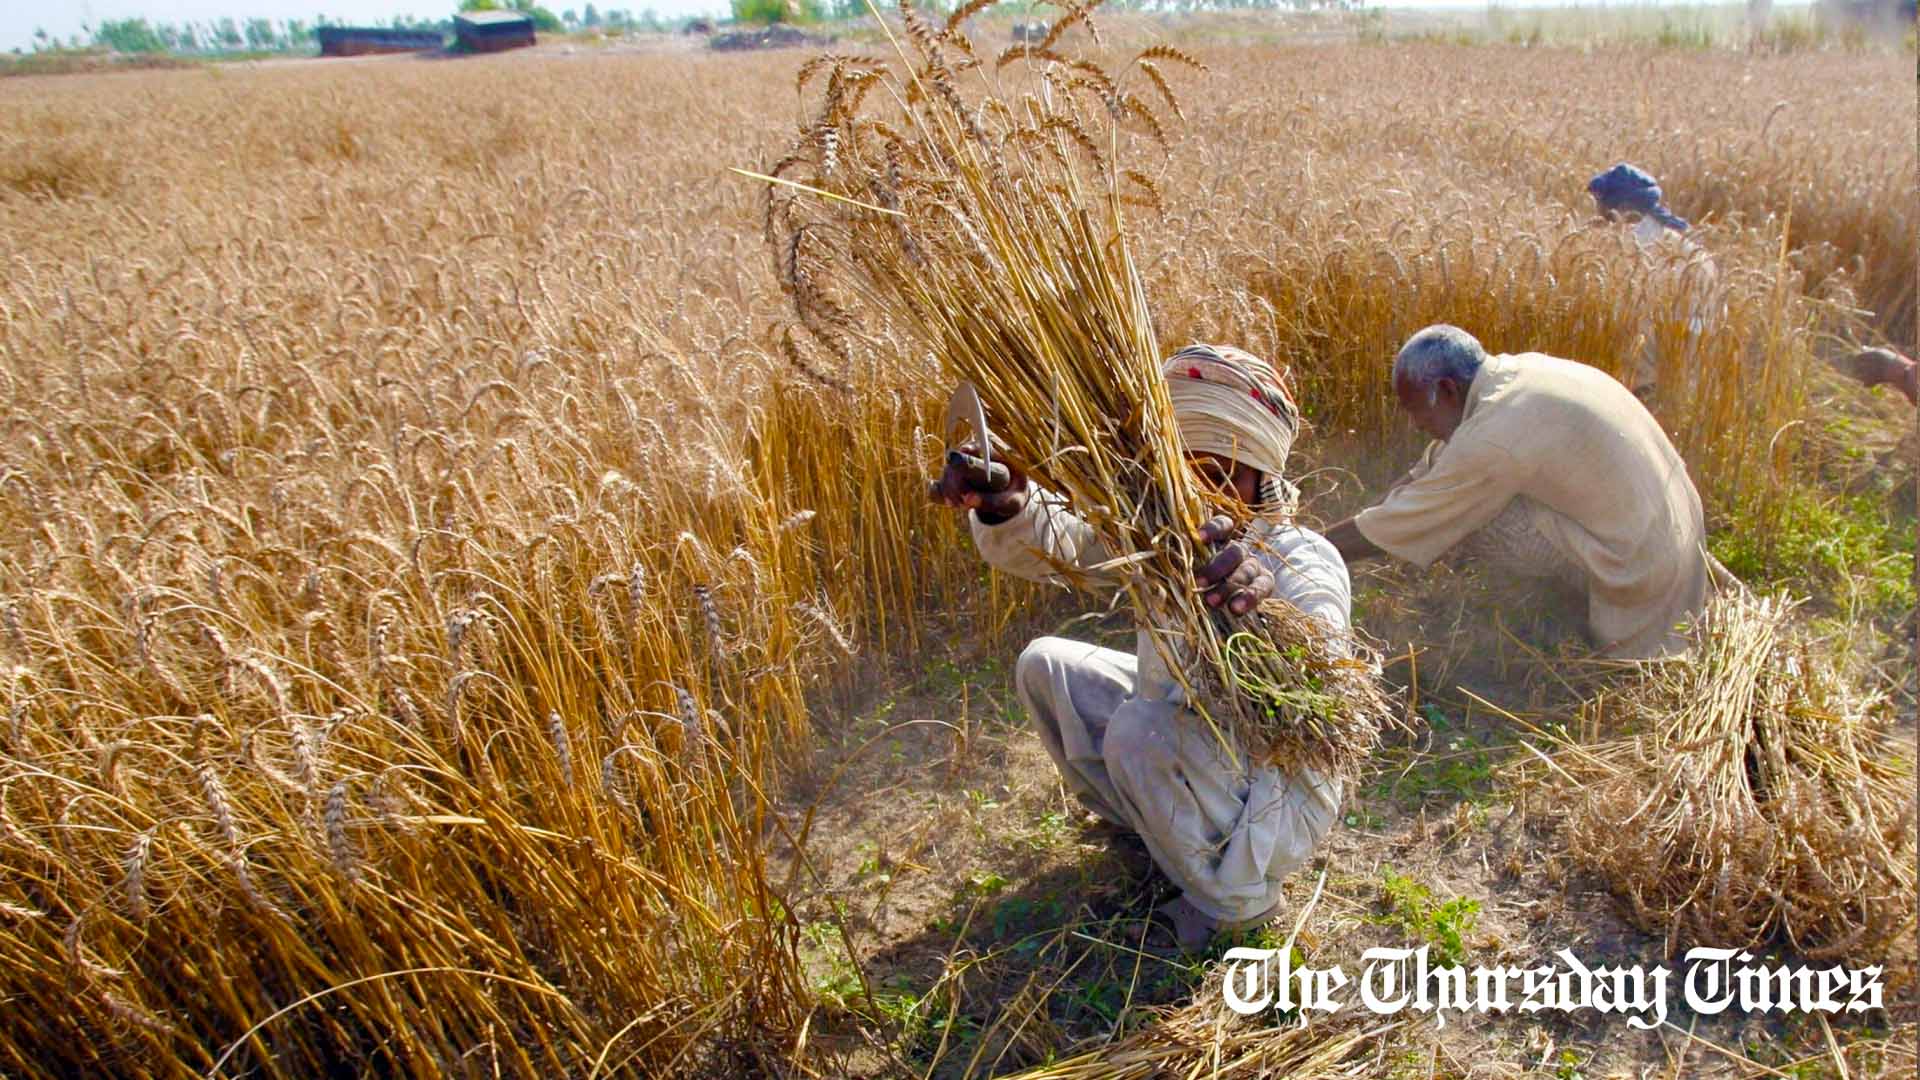 A file photo is shown of villagers harvesting wheat at Lahore in 2007.